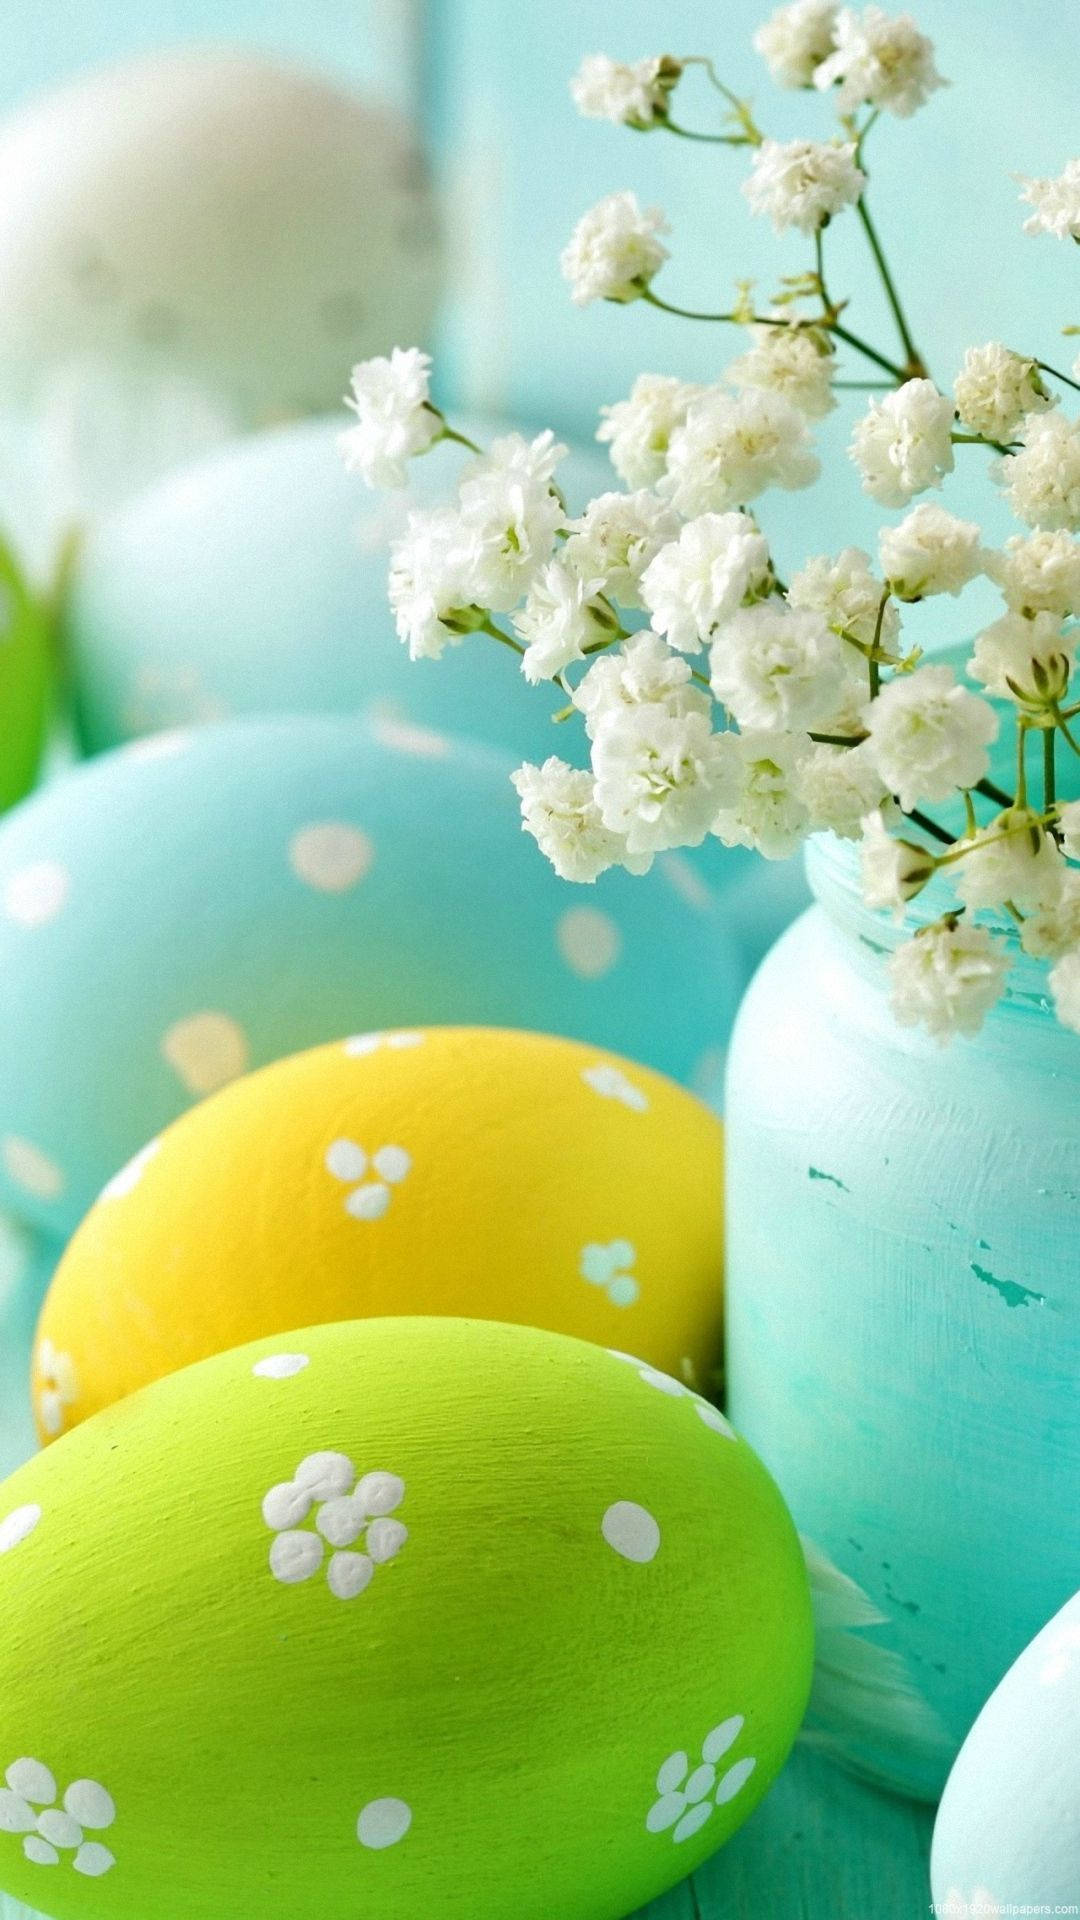 Stay Connected Seasonally With The Easter Iphone Background